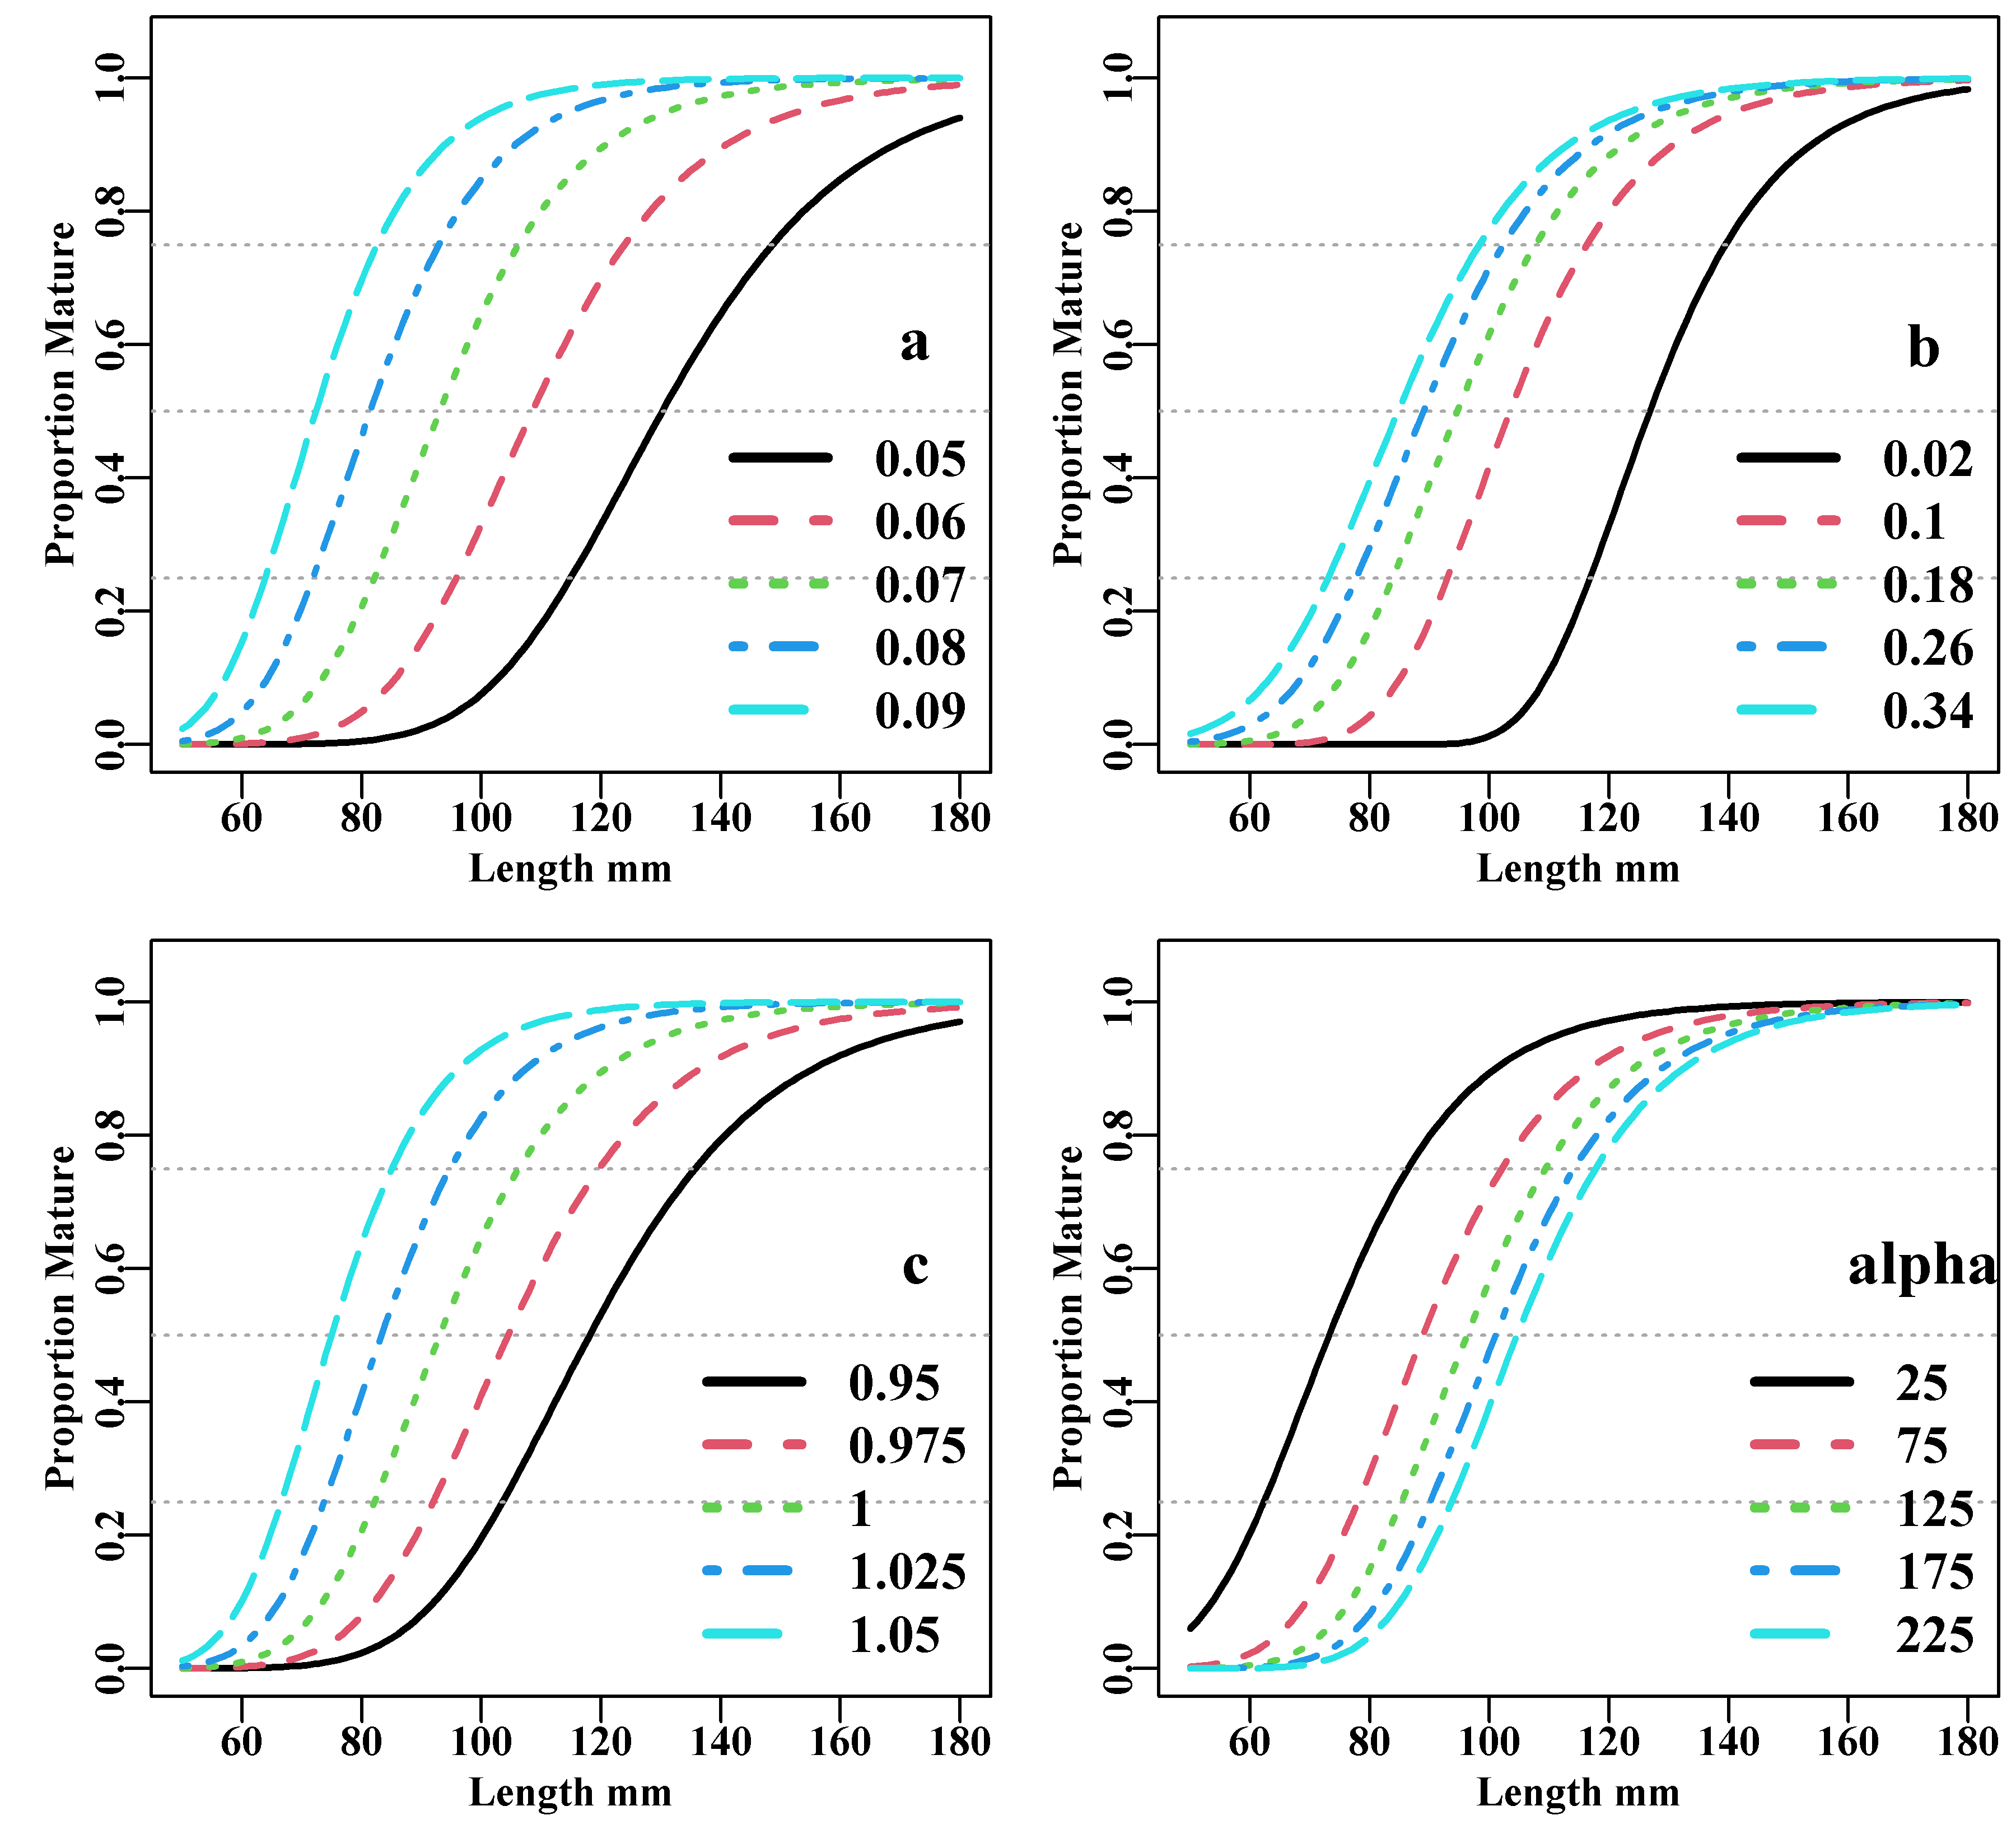 The proportion mature at length for hypothetical examples using the Schnute and Richards unified growth curve. The parameters when not varying were set at a=0.07, b=0.2, c=1.0, and alpha=100.